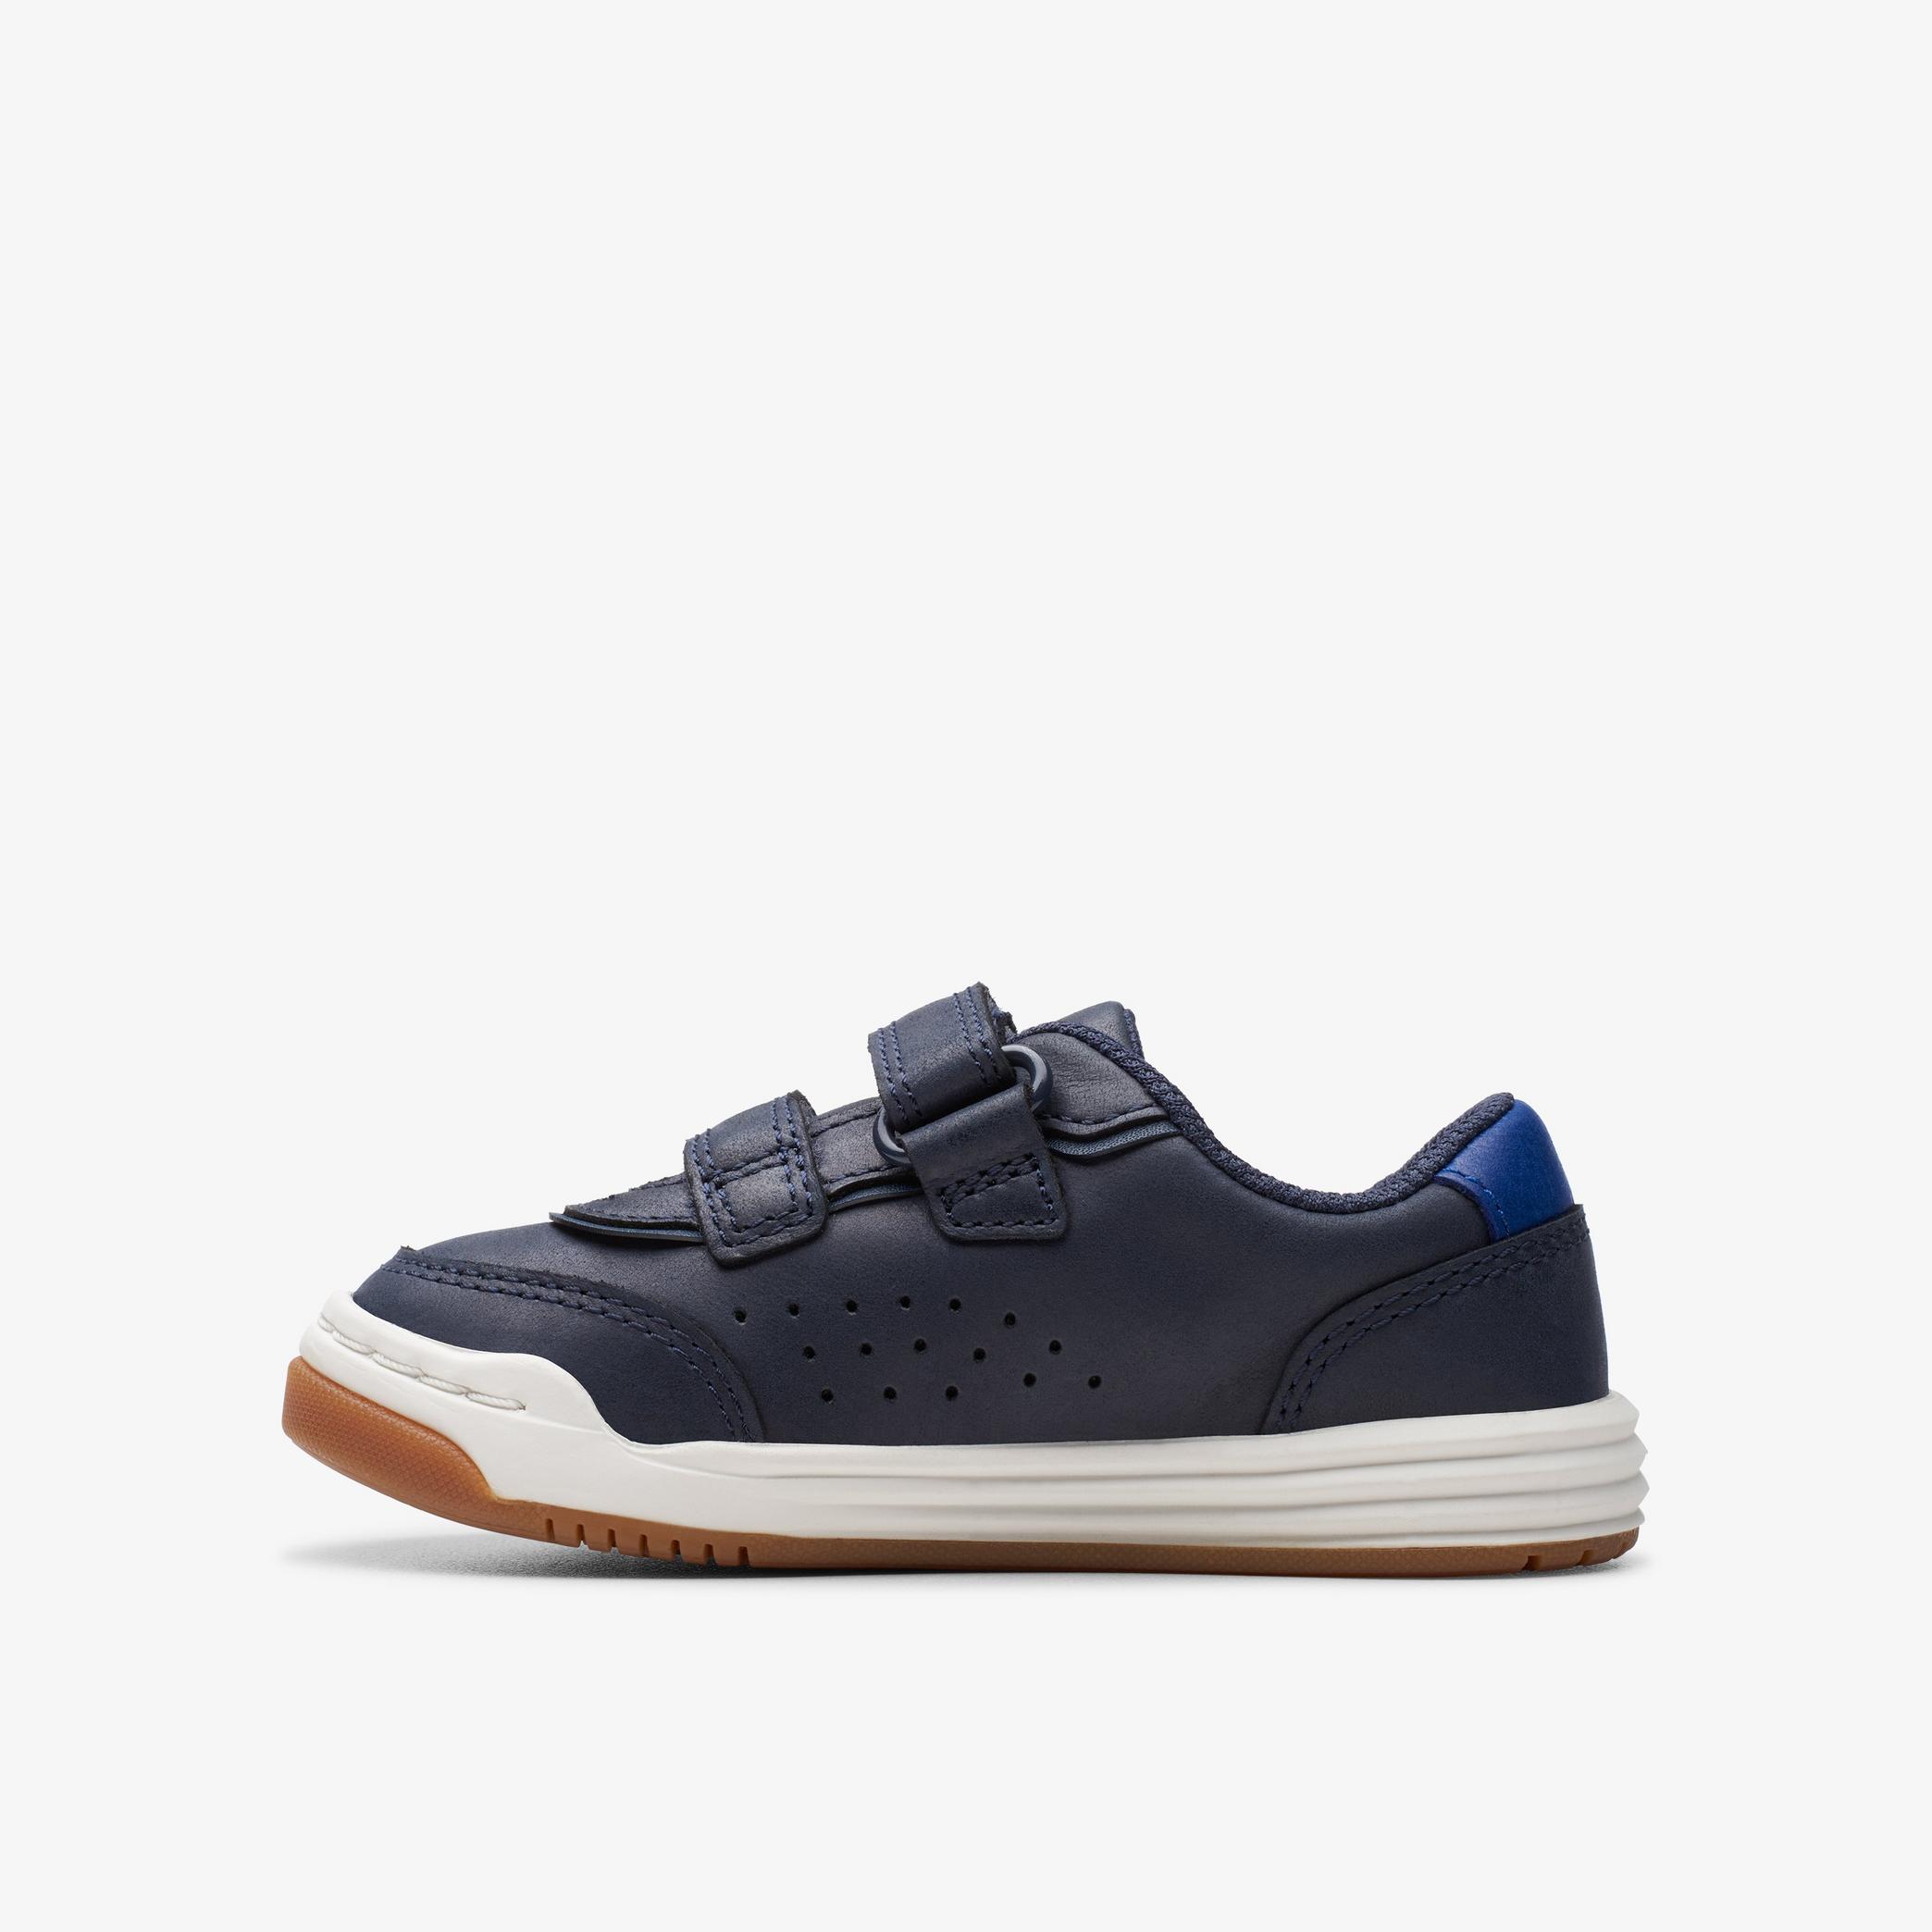 Urban Solo Toddler Navy Trainers, view 2 of 6